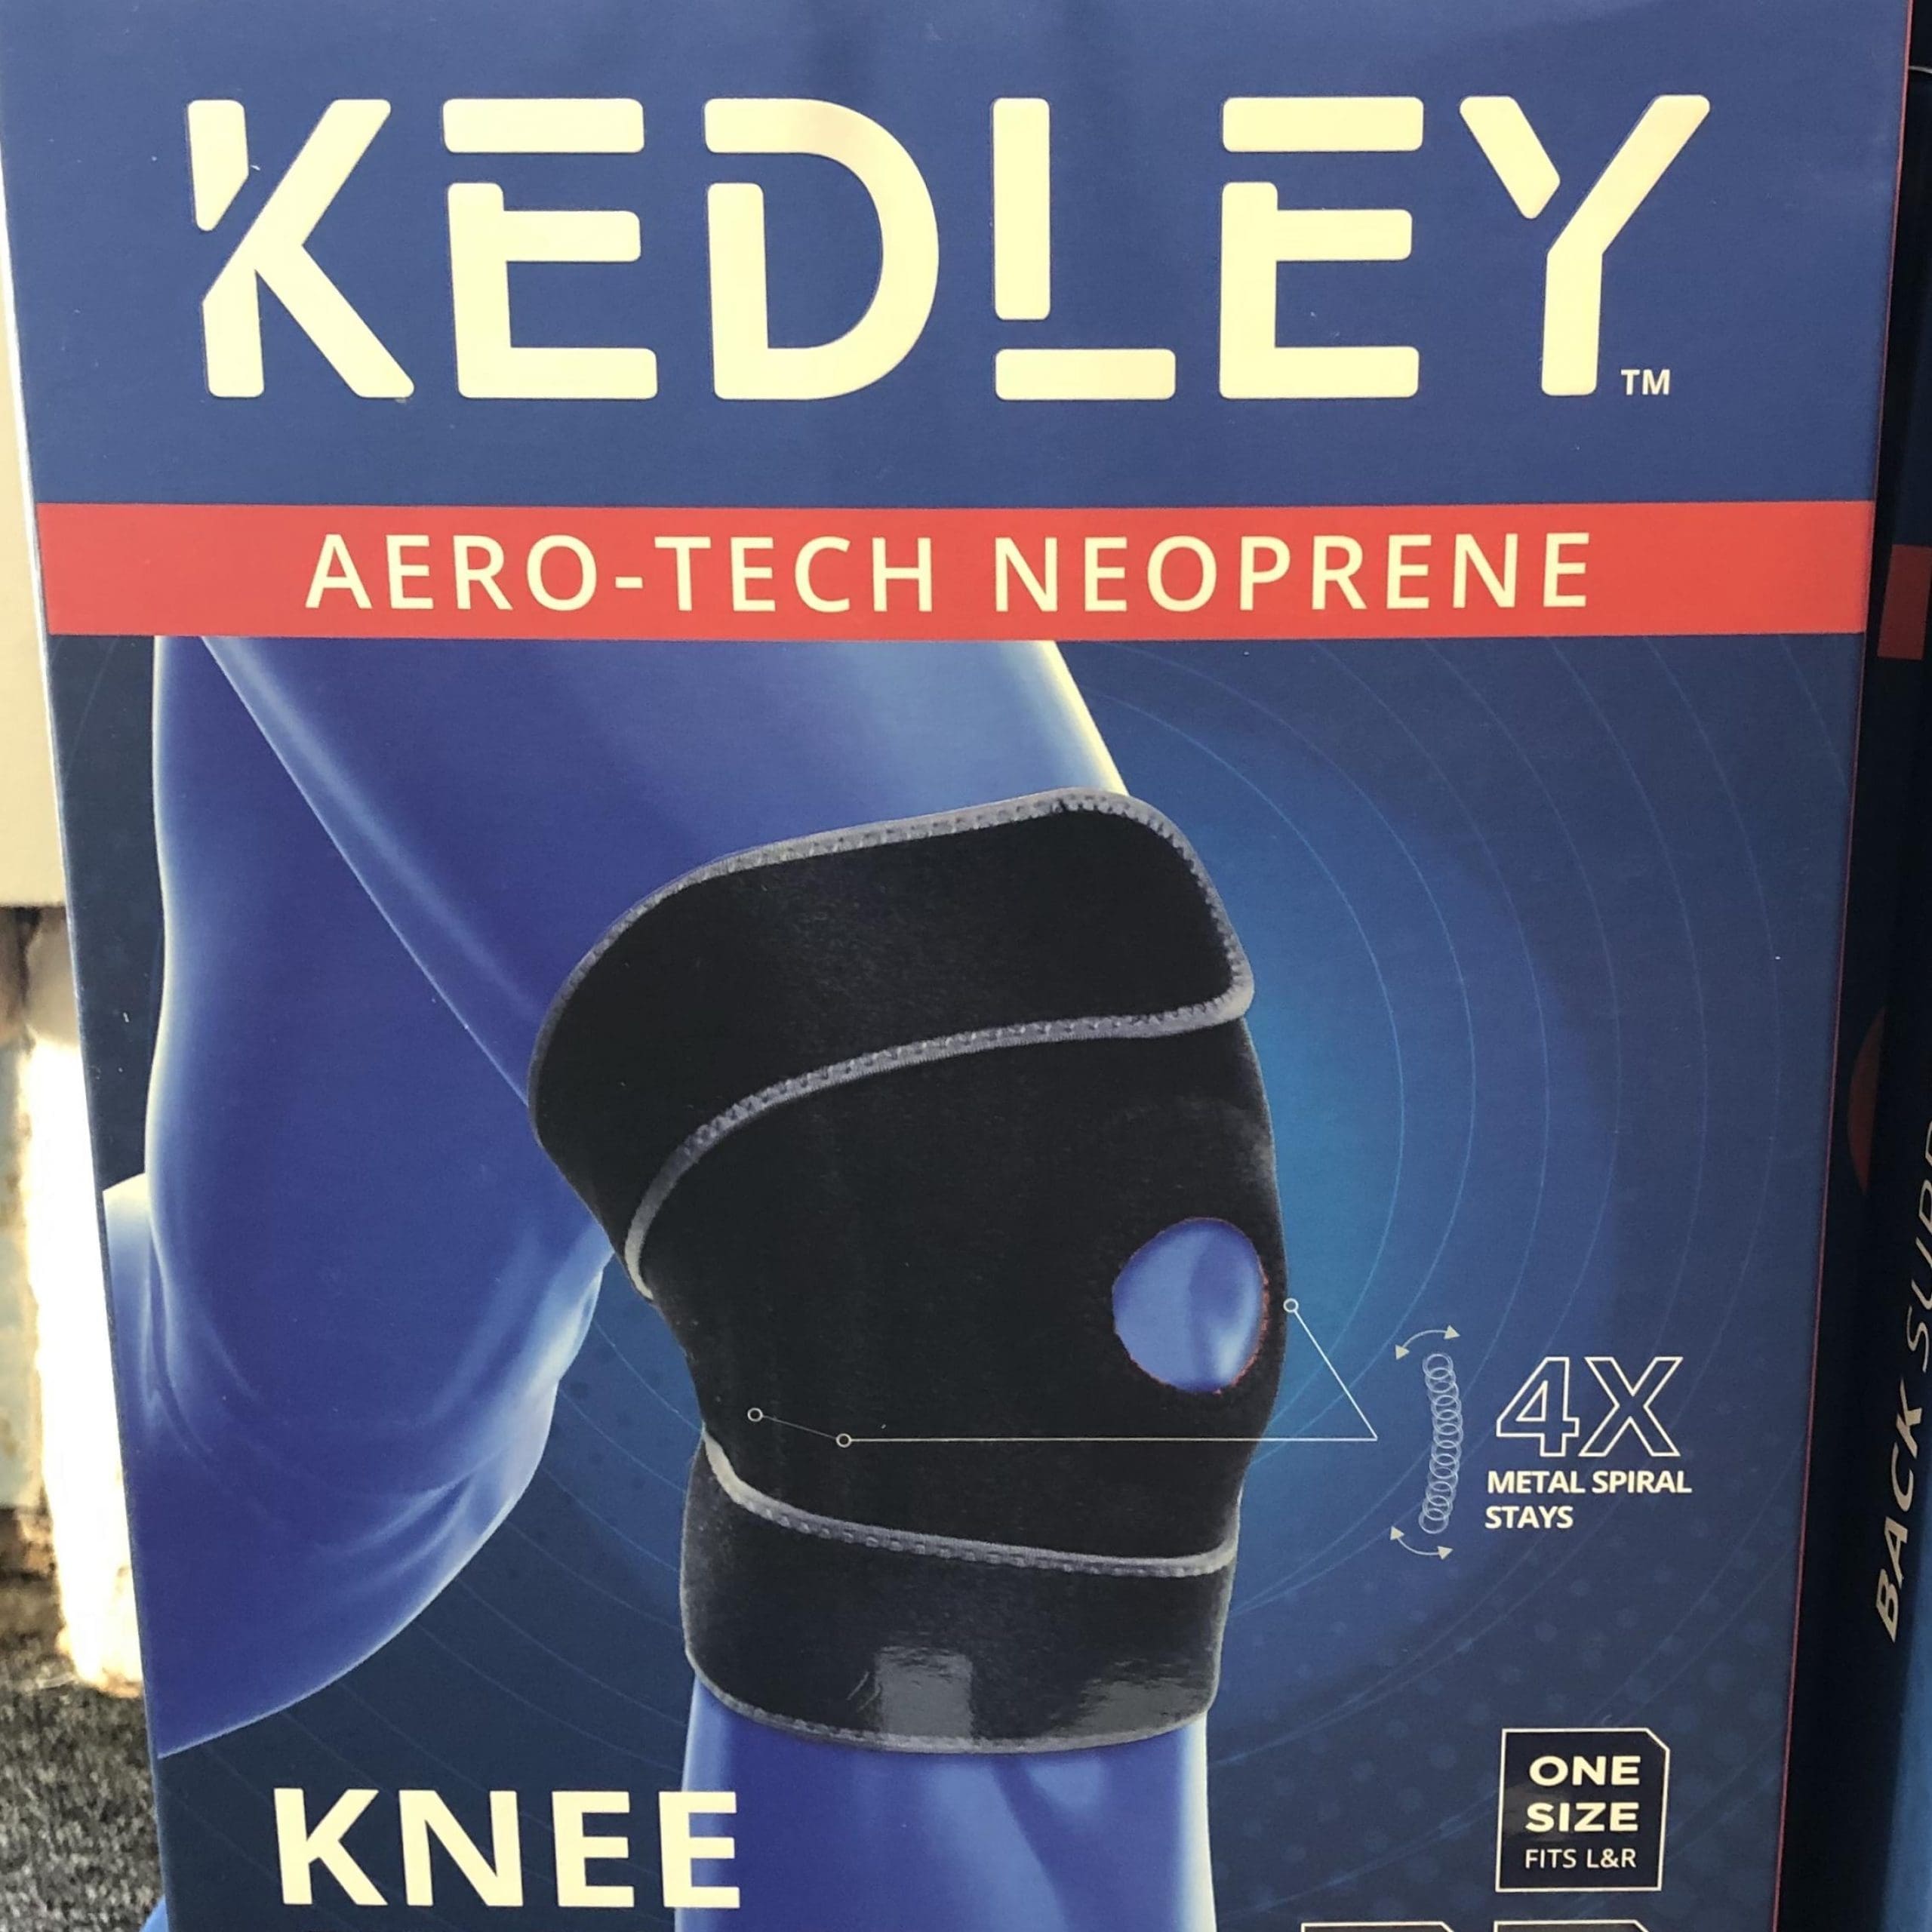 Kedley Knee Support With Stabilizer -Universal